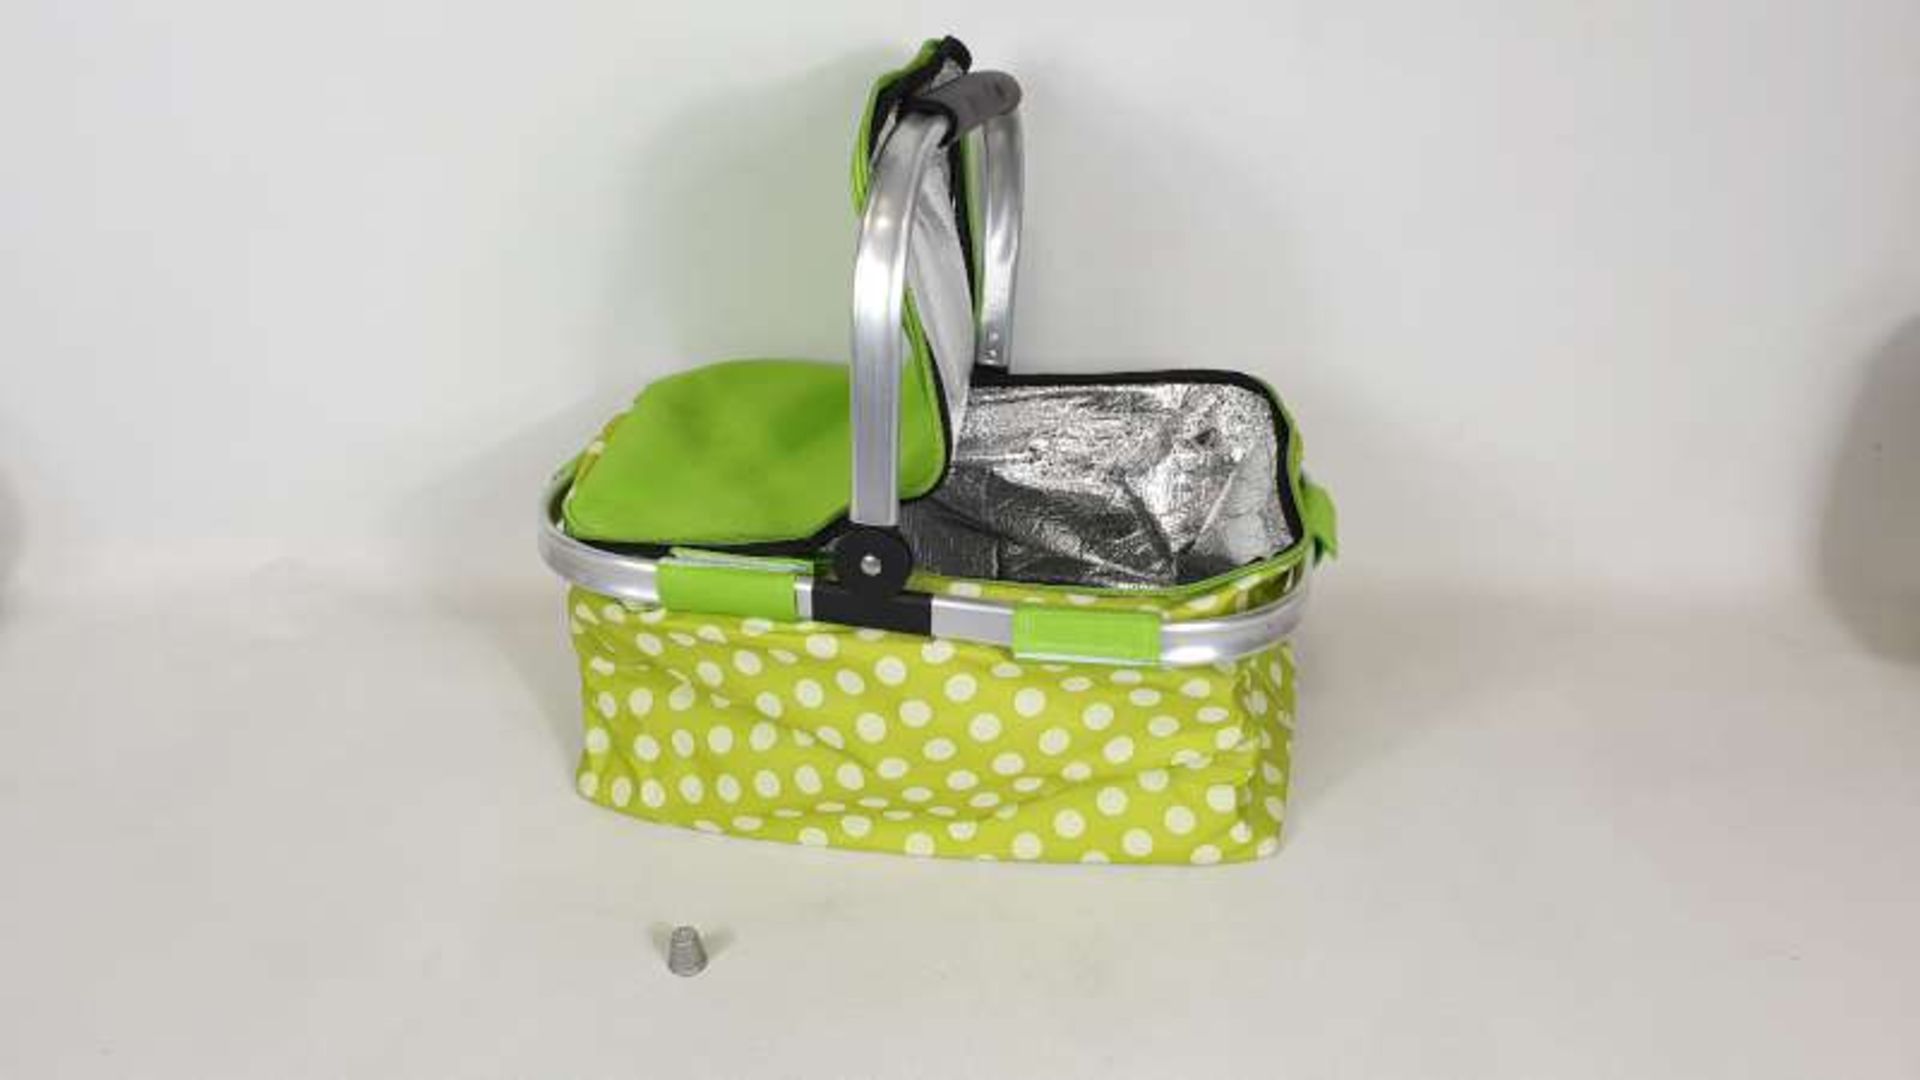 30 X LIME GREEN SPOTTY PICNIC BASKETS IN 3 BOXES